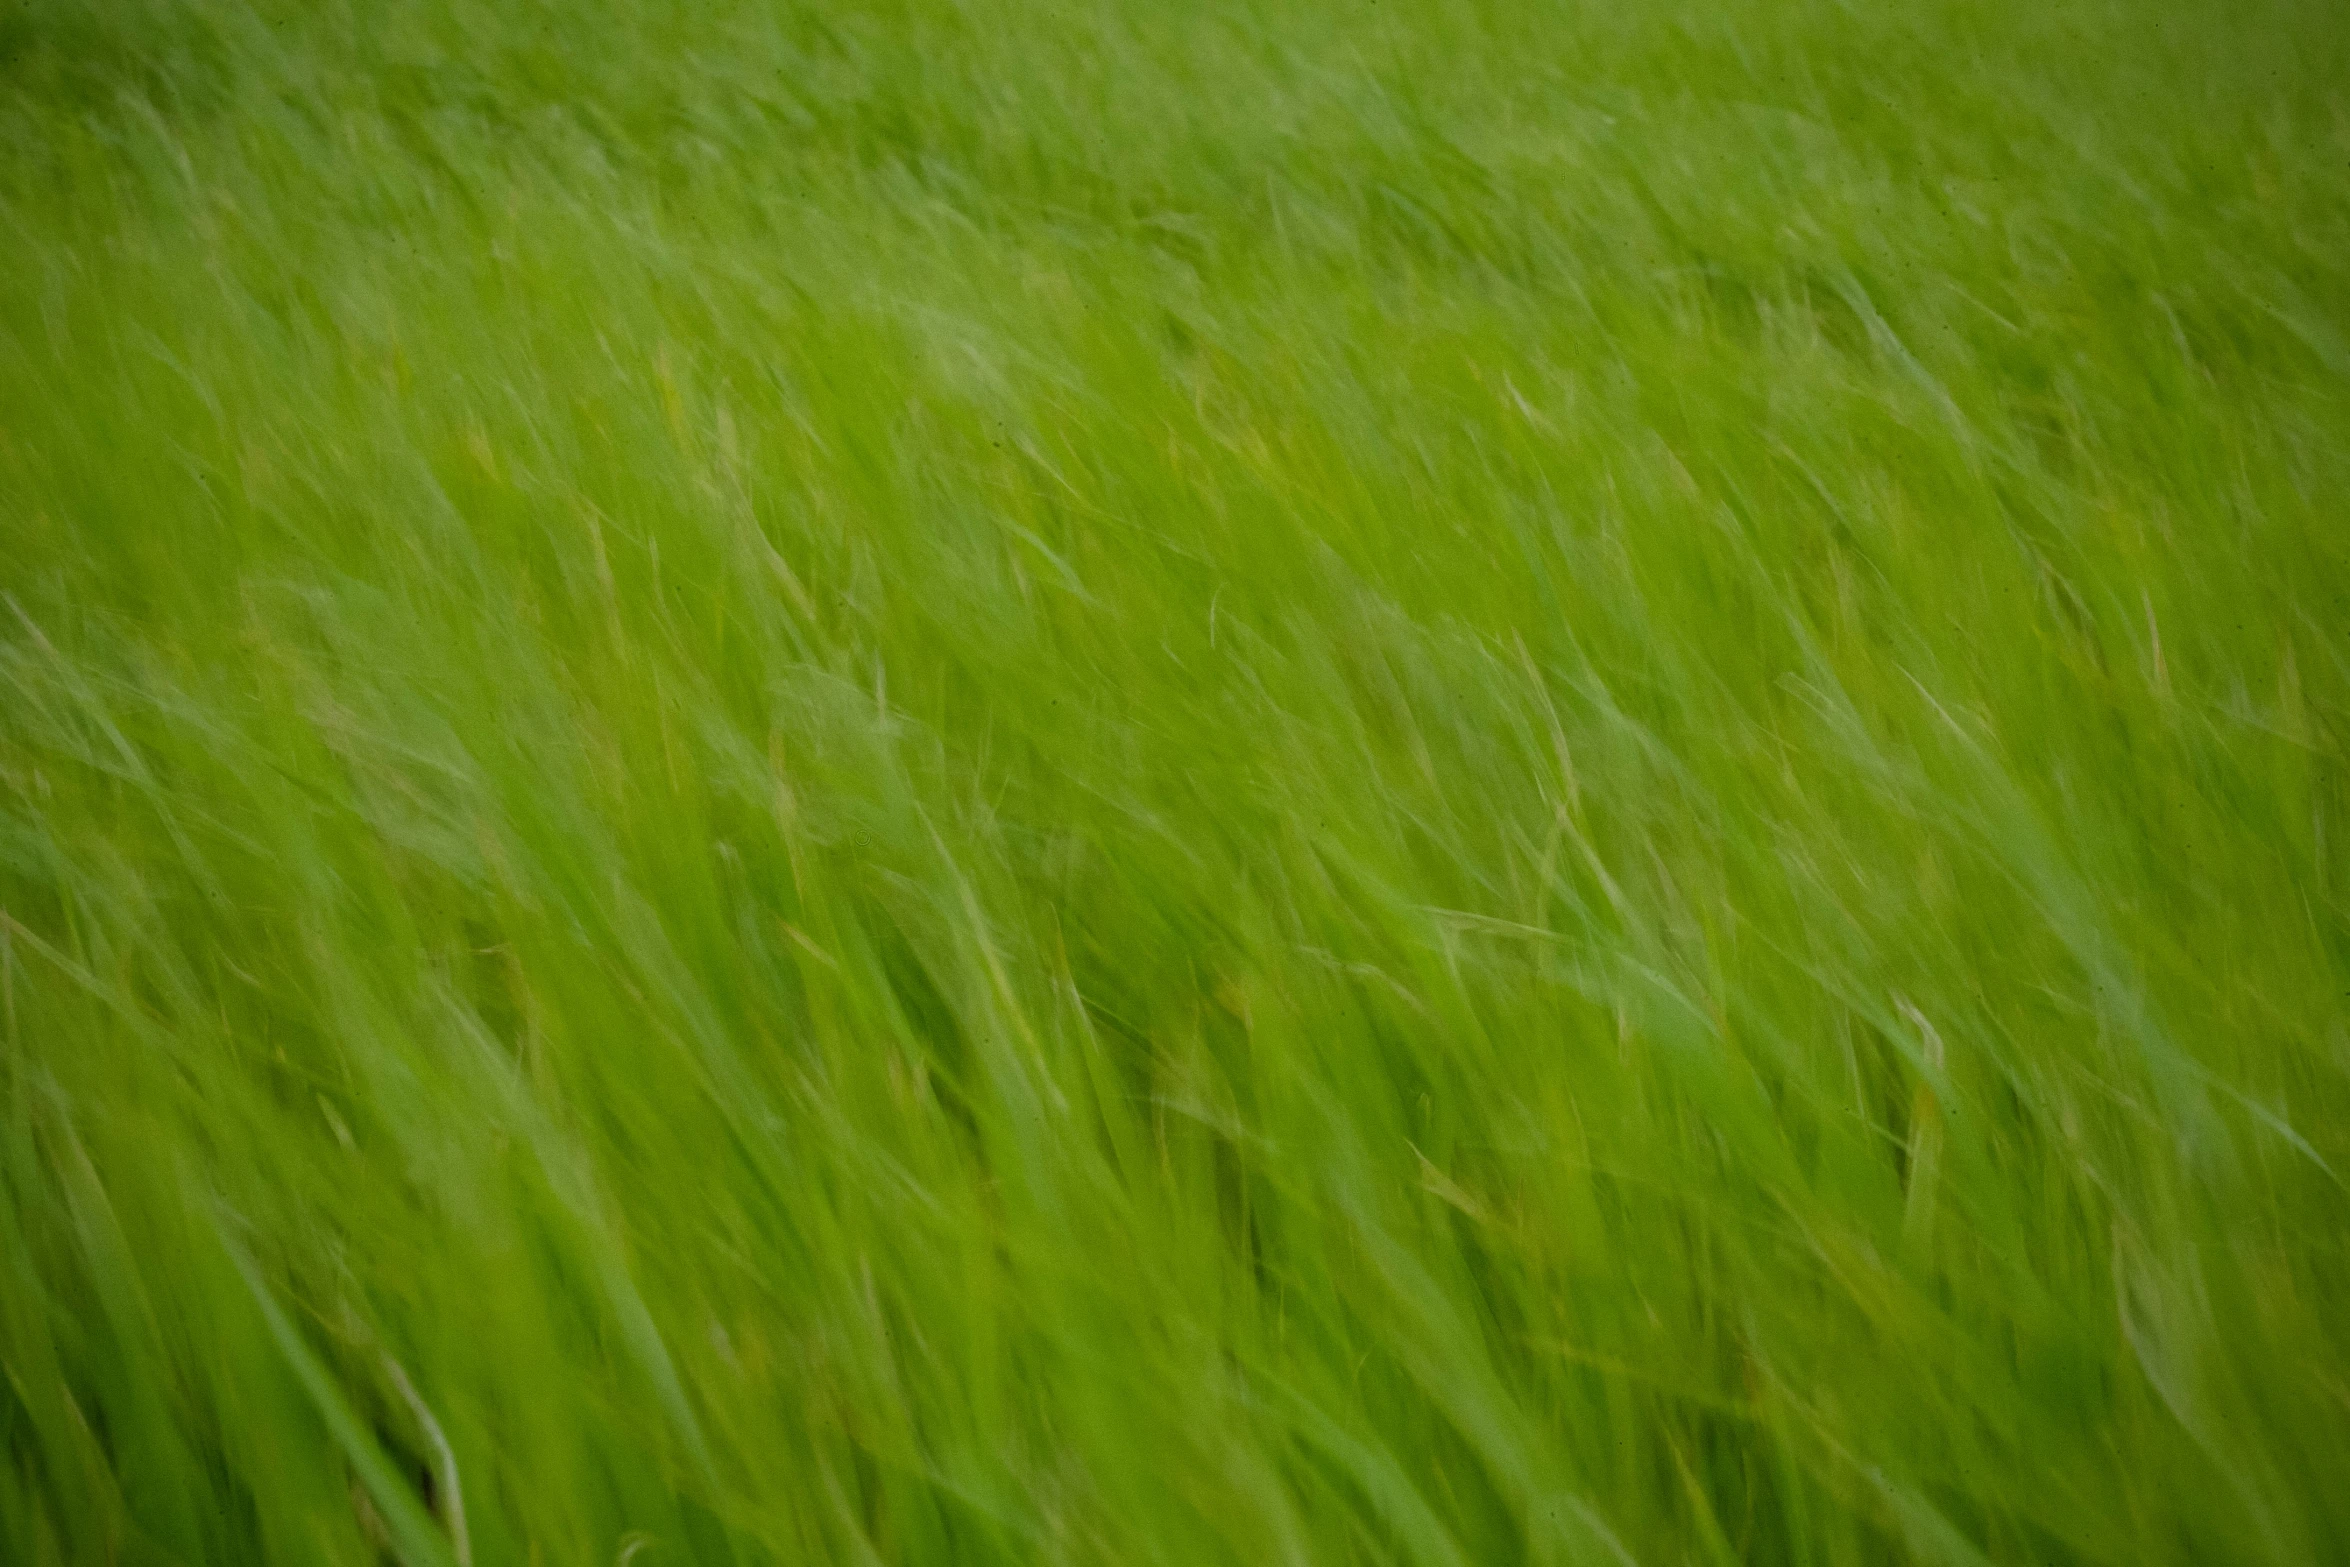 long green grasses with wind blowing through them